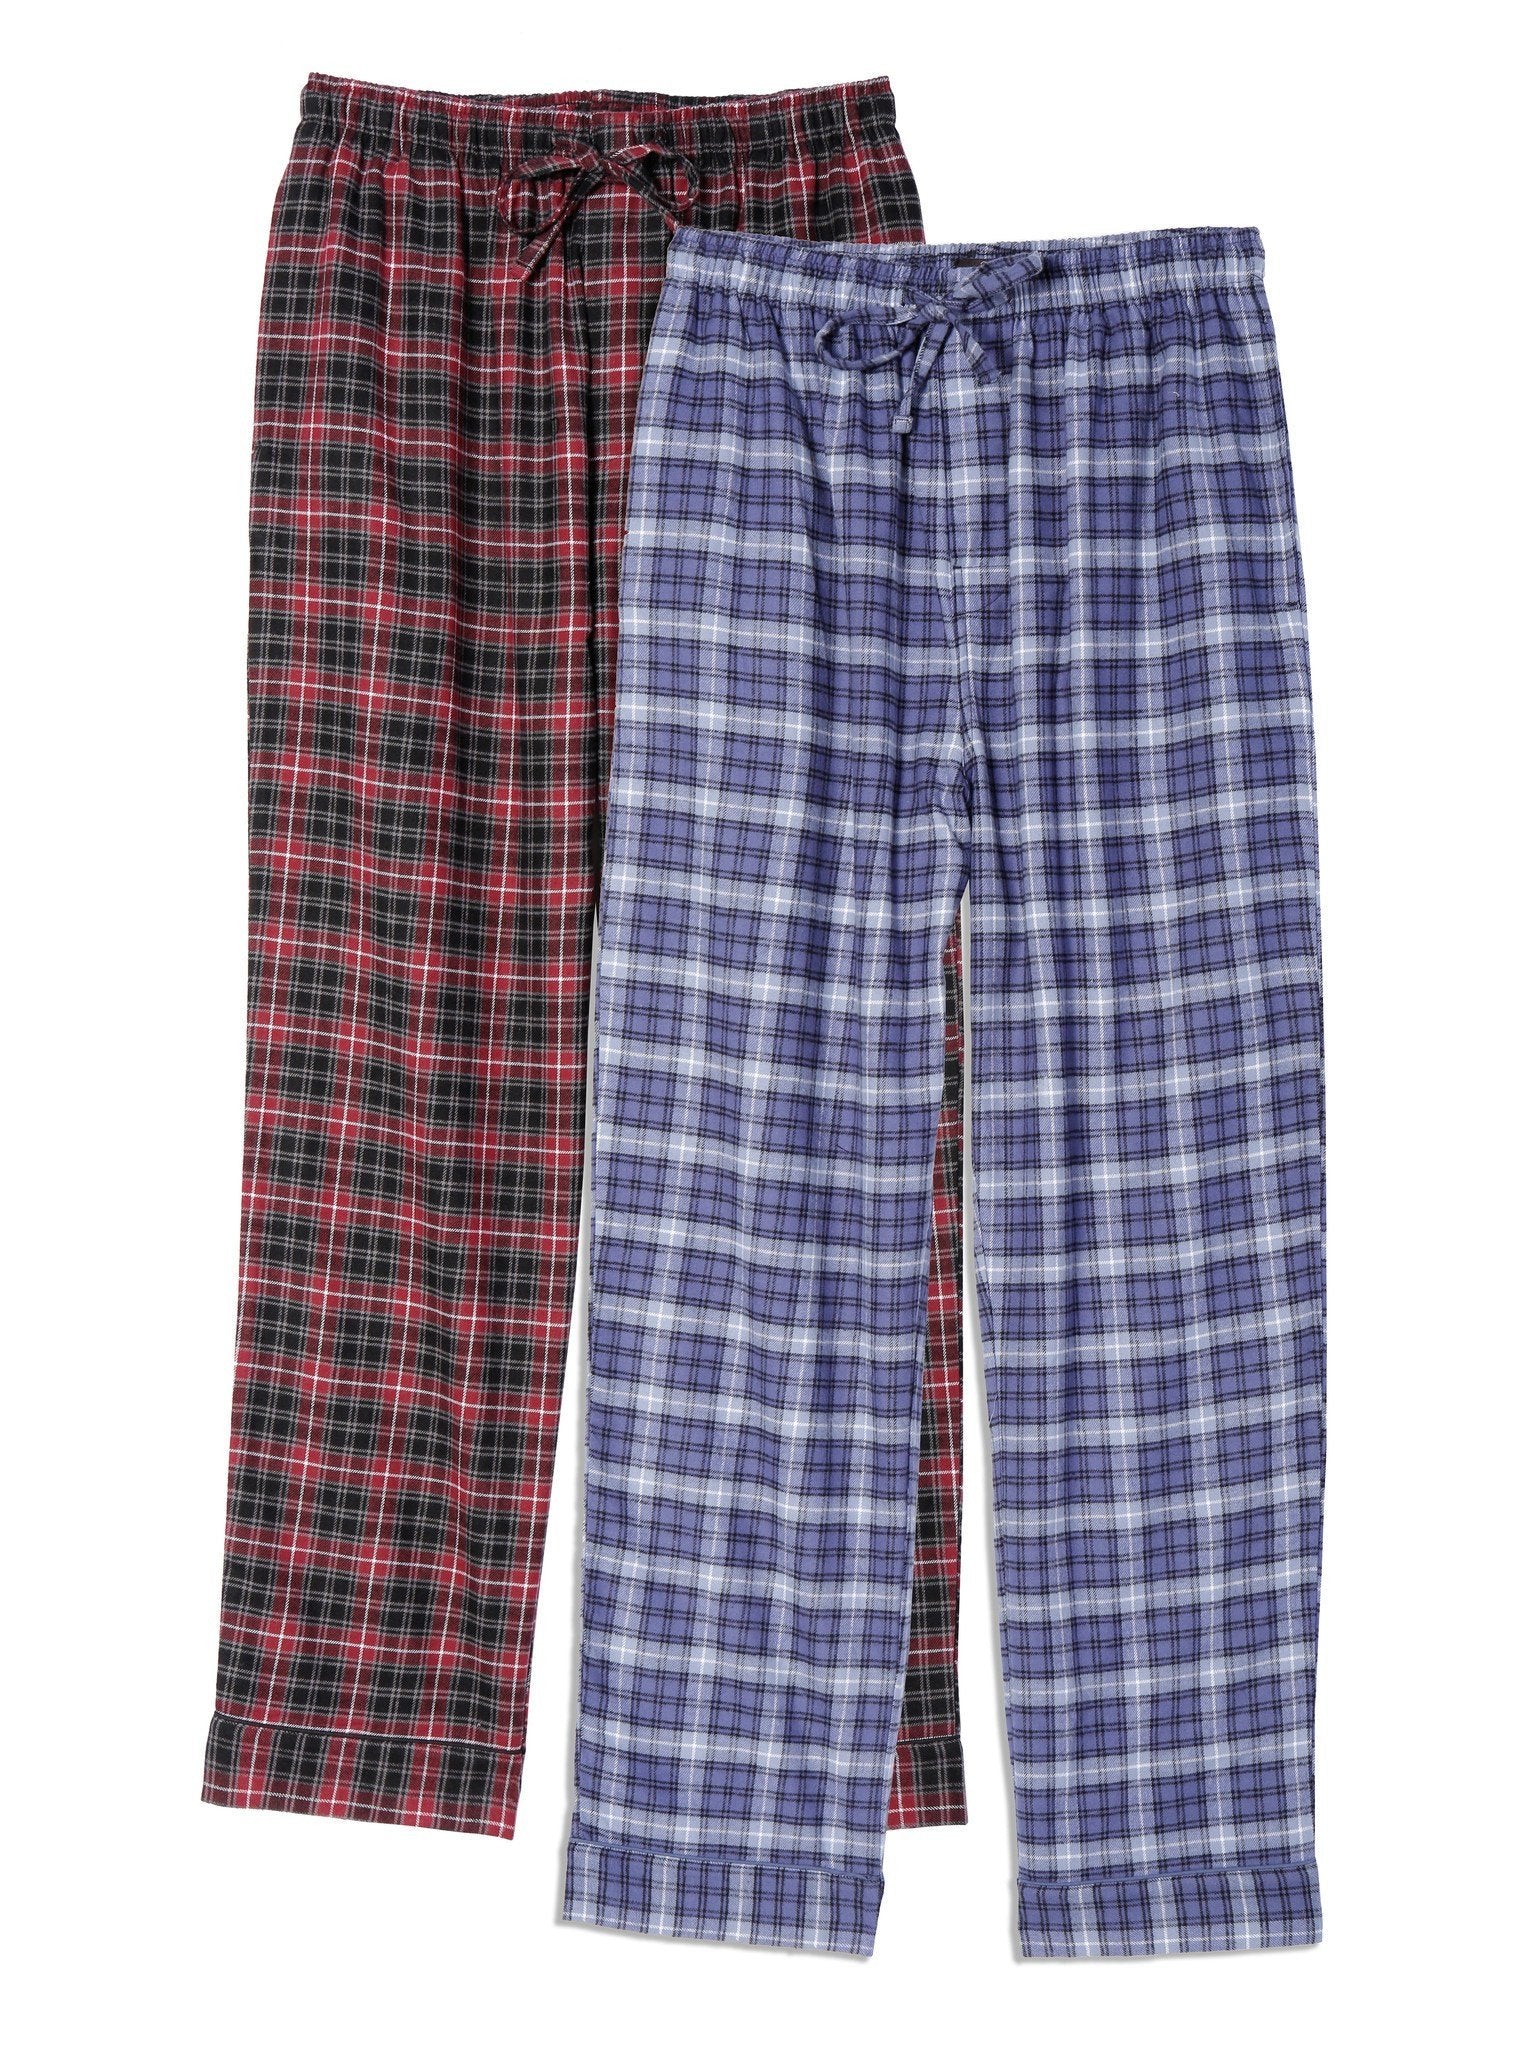 Mens 100% Cotton Flannel Lounge Pants (Relaxed Fit) 2-Pack